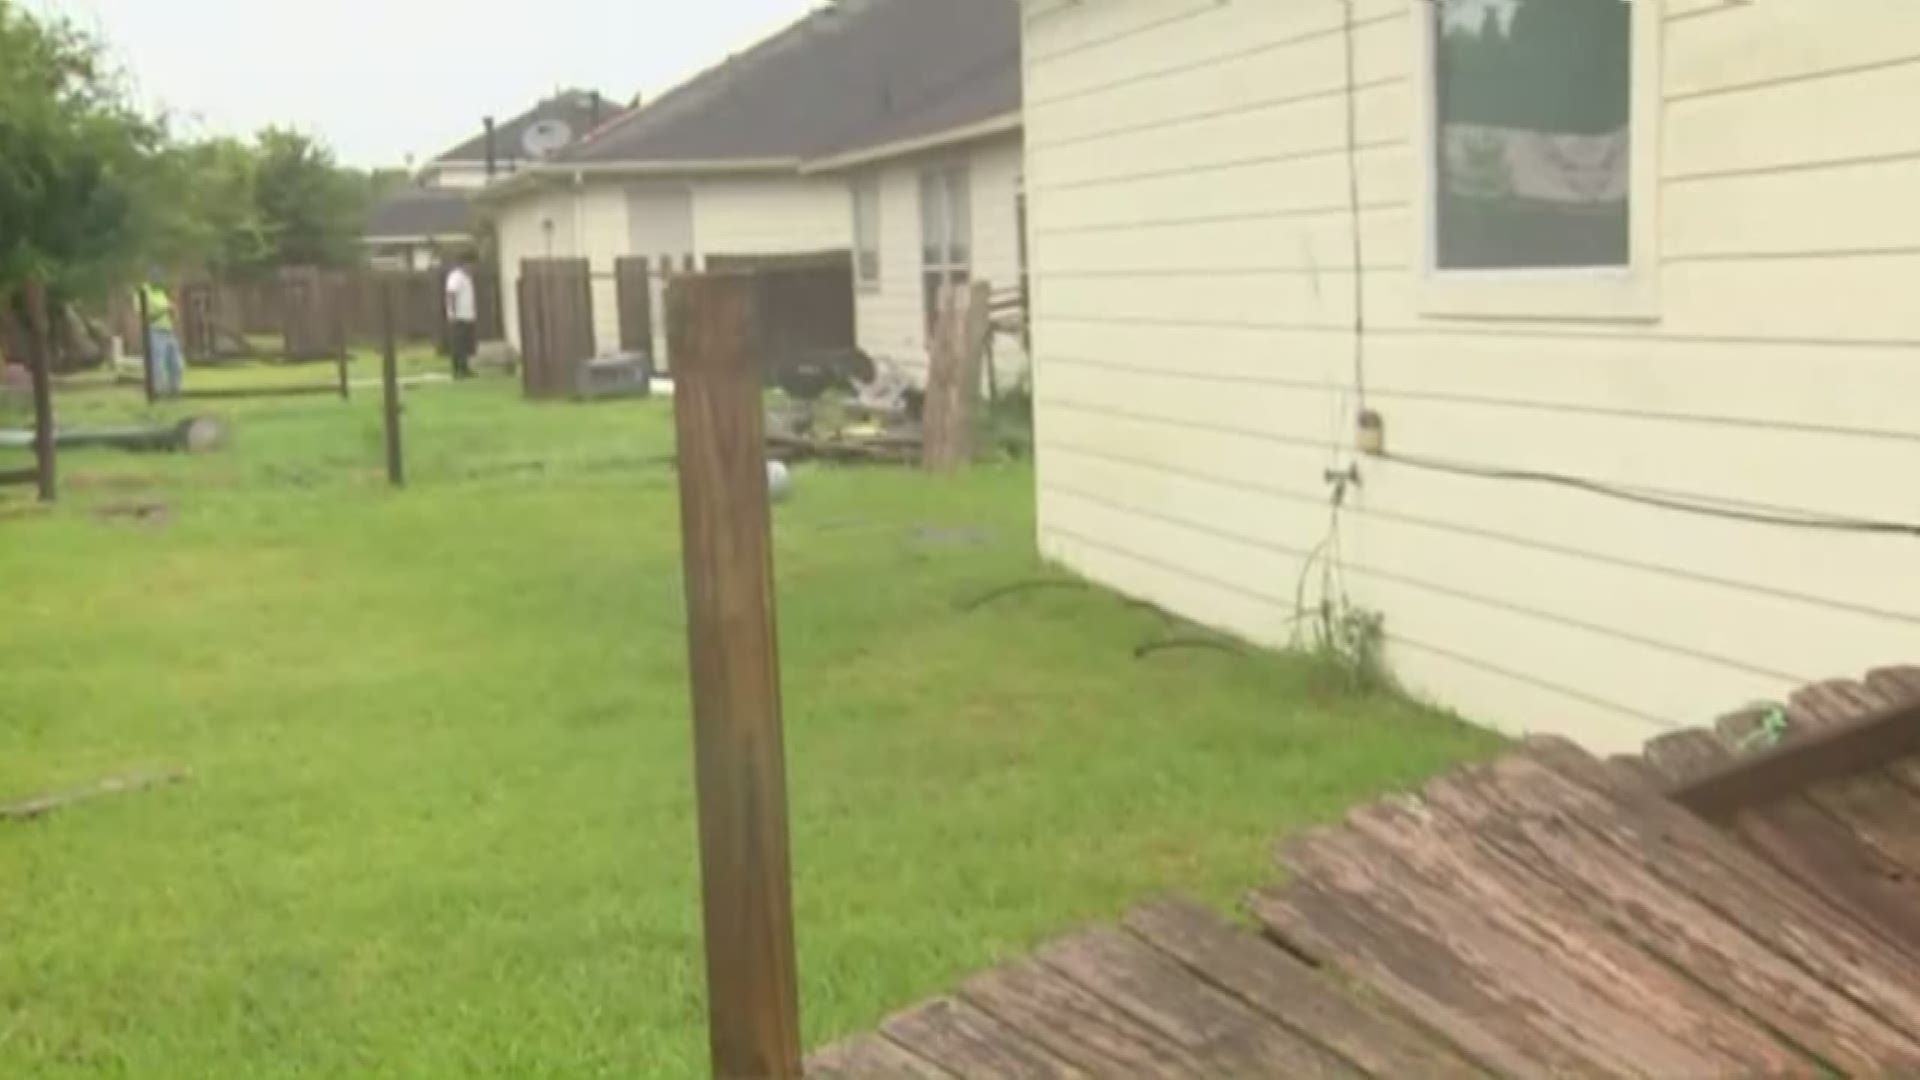 Residents in the area of Grand Parkway and the Westpark Tollway are surveying storm damage Saturday morning after a possible tornado overnight.